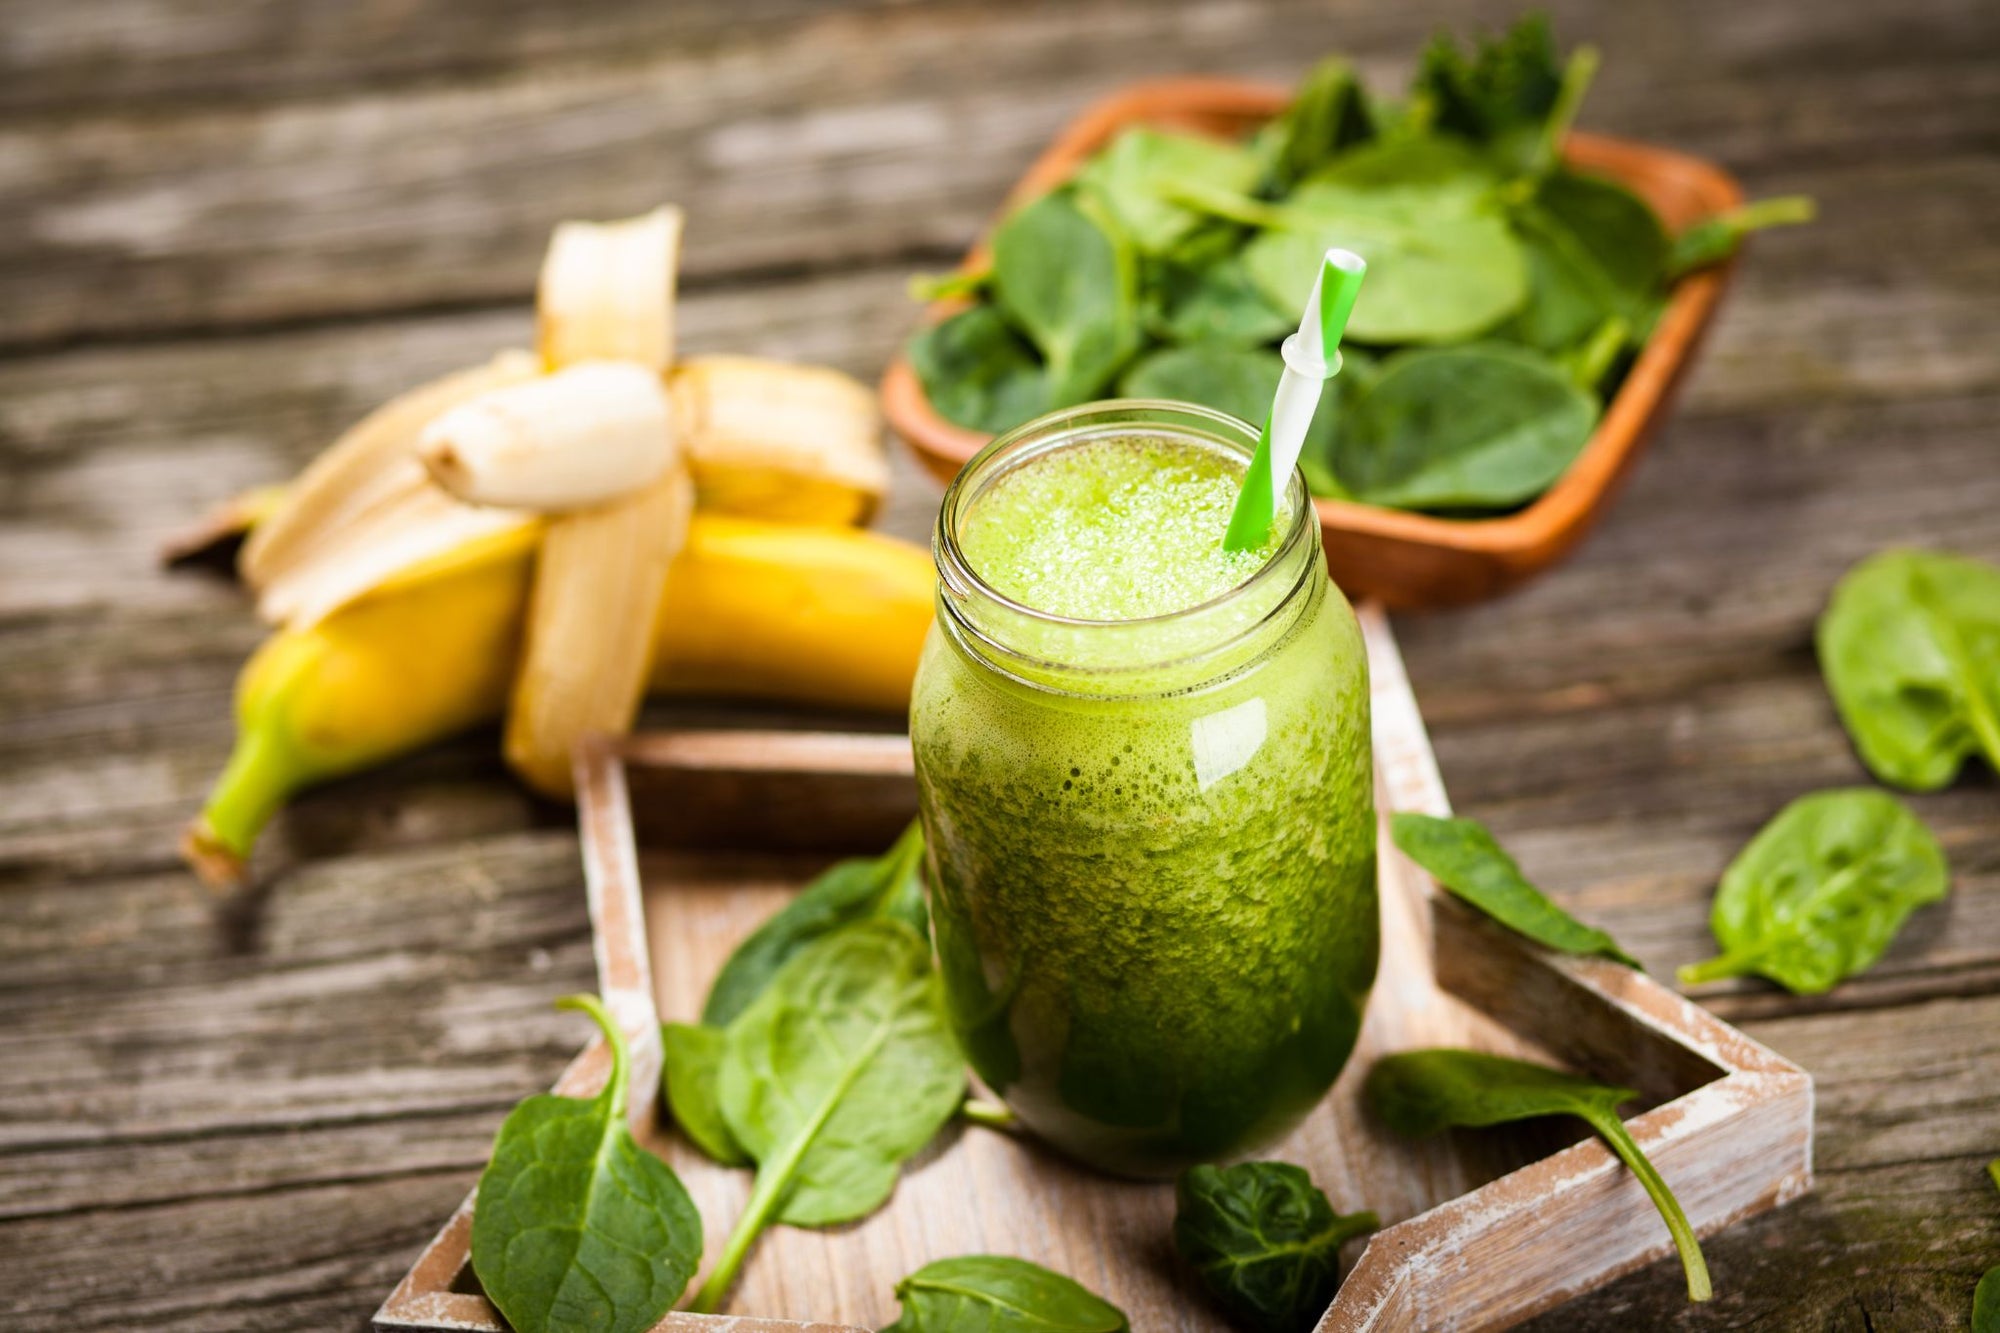 Banana Spinach Smoothie by Chris